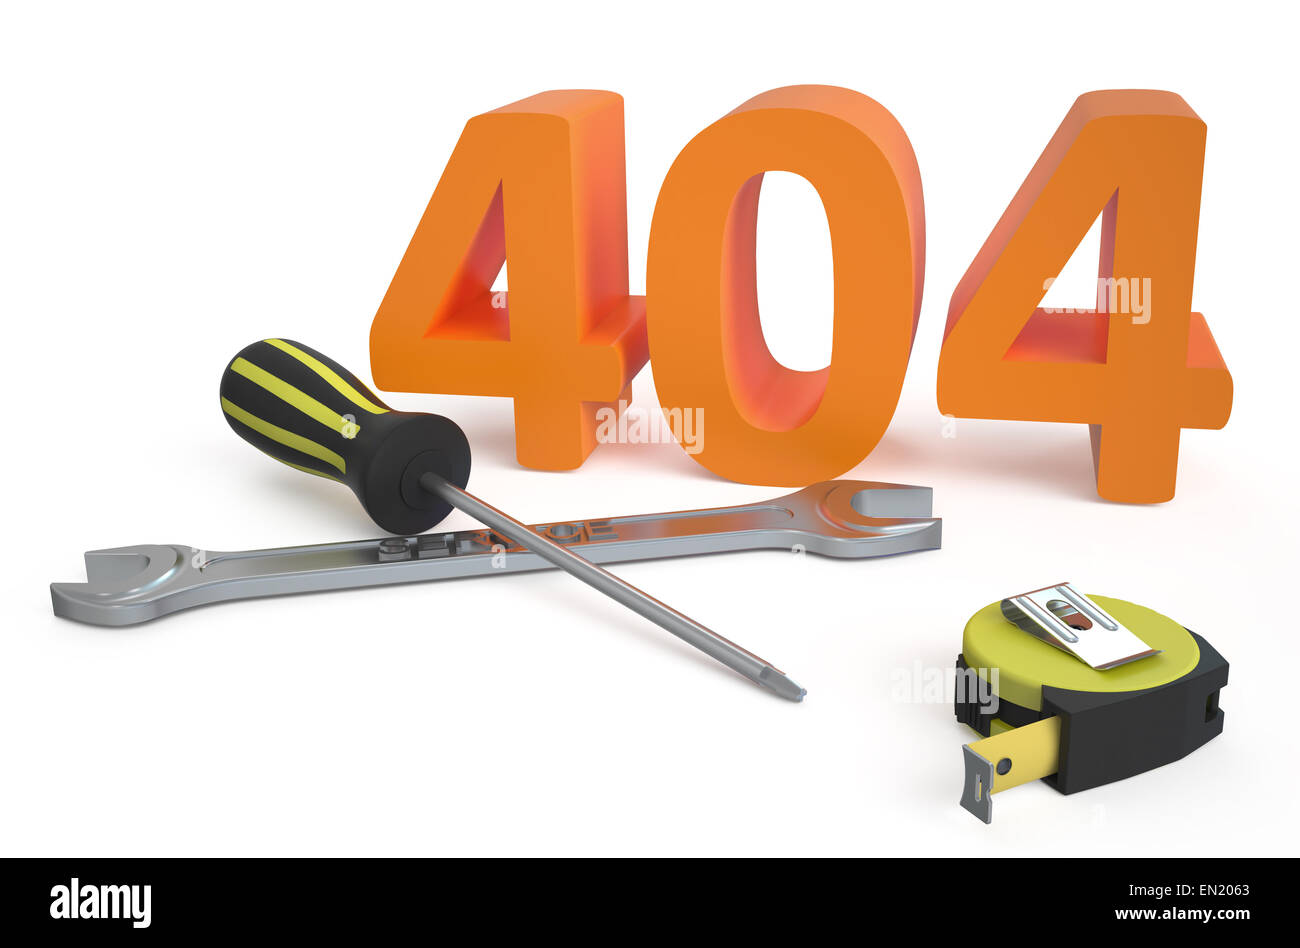 404 repairs concept isolated on white background Stock Photo